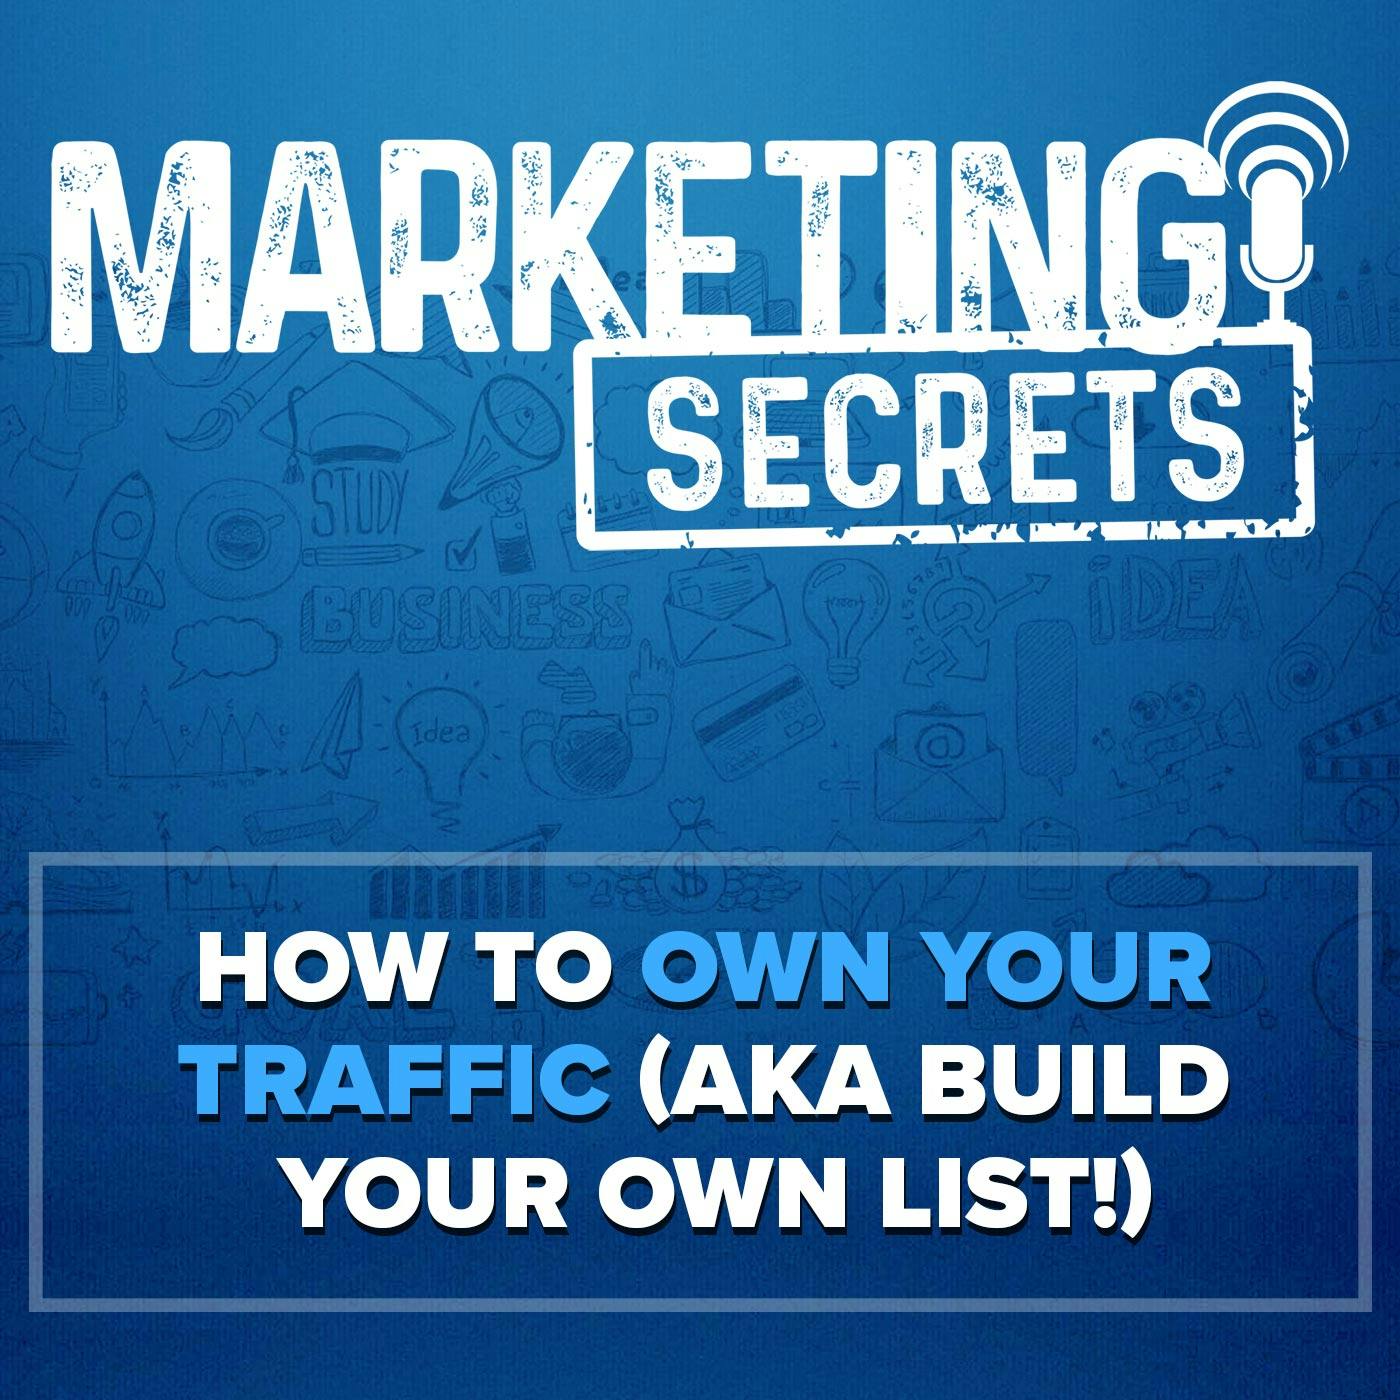 How To OWN Your Traffic (AKA Build Your Own List!) (TS)